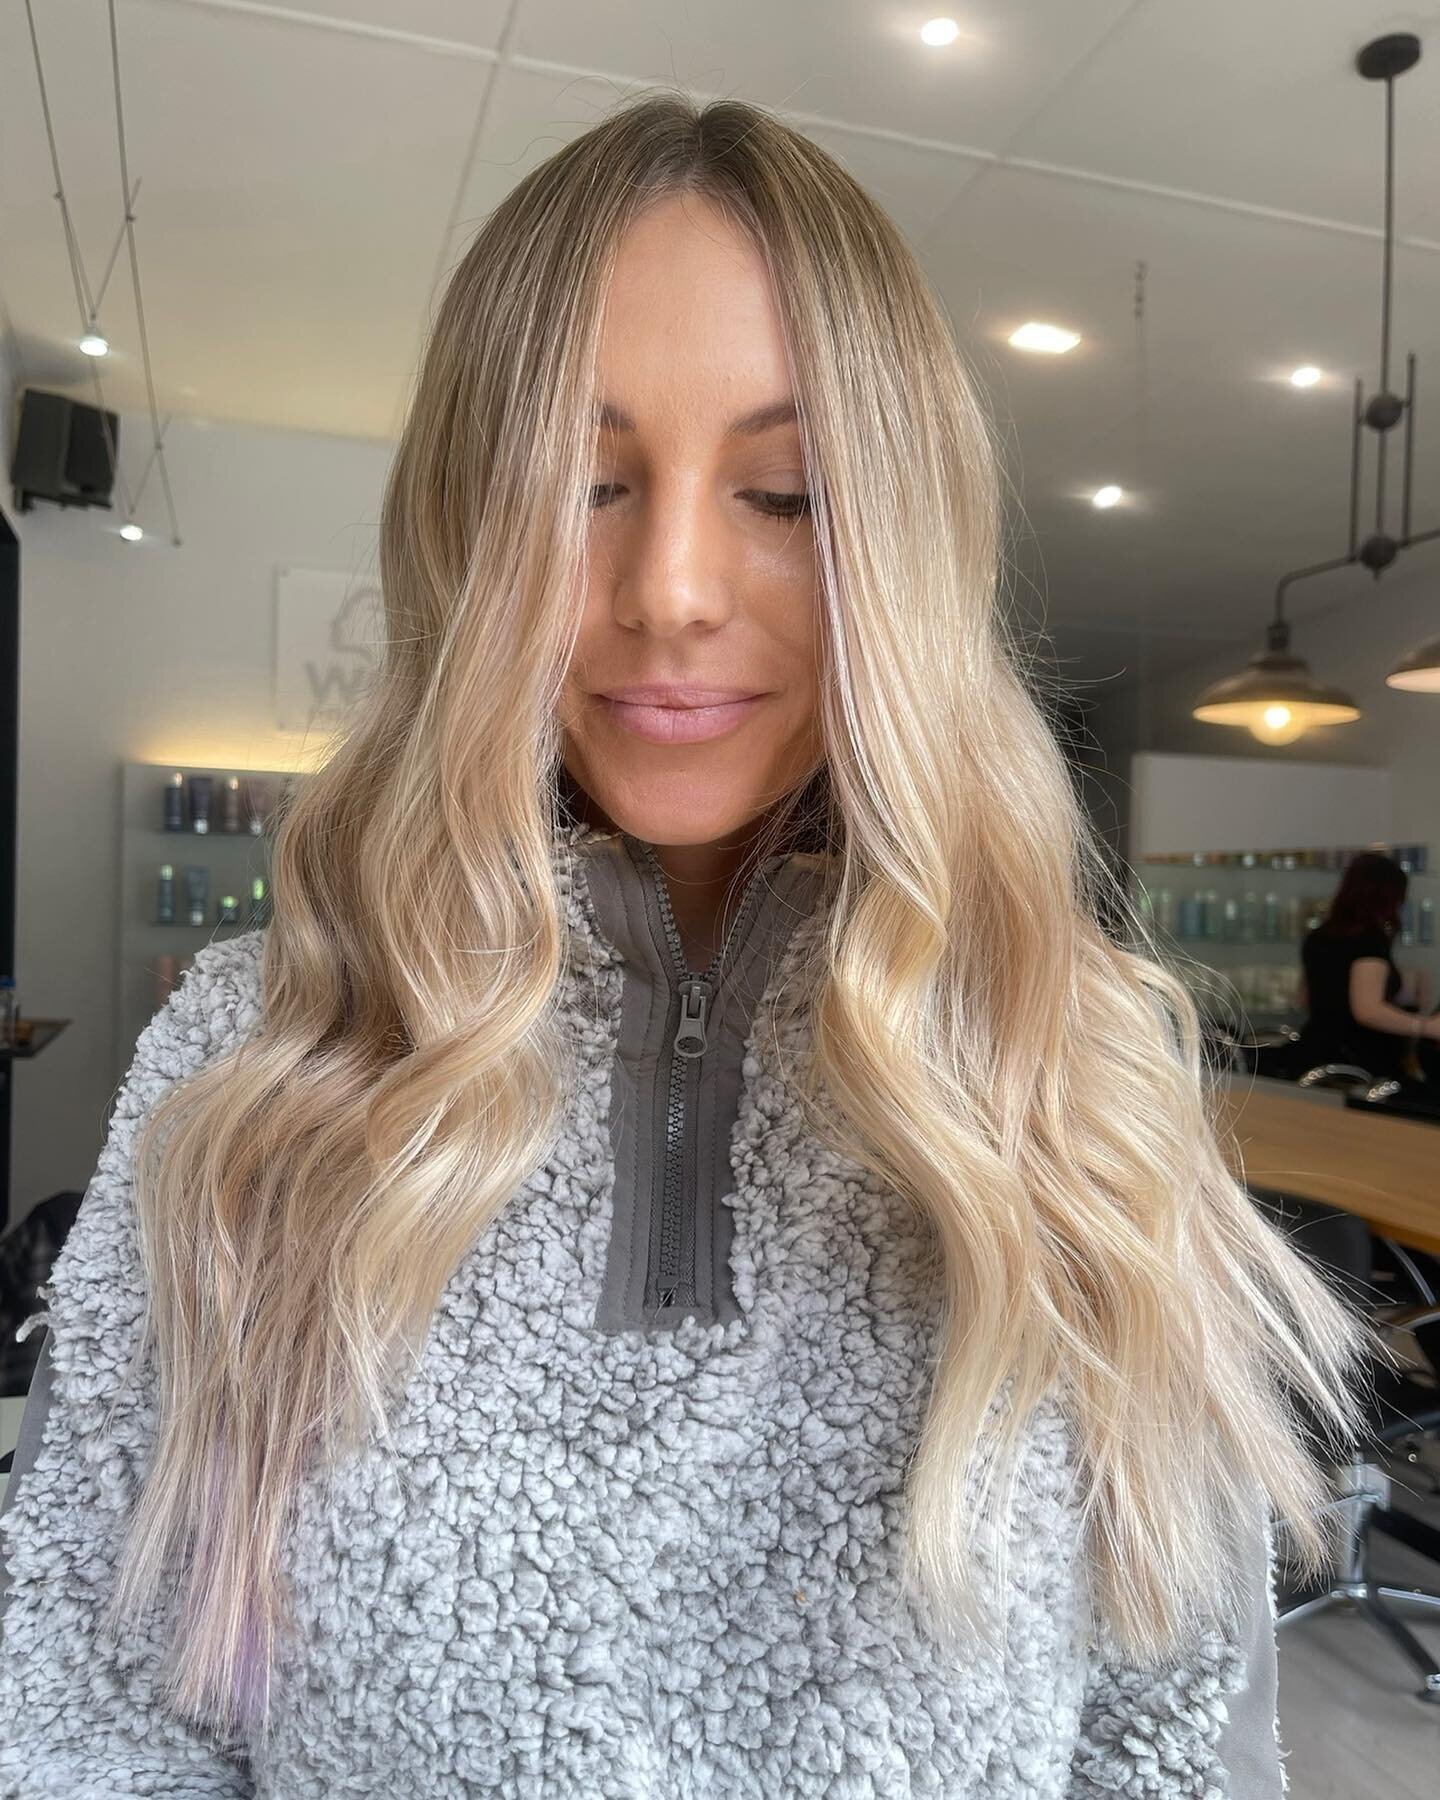 The stunning @delllifts adding a twist to a classic balayage all created by Rocco and styled by Bella! #balayage #faceframe #faceframing #faveframinghighlights #blonde #blondehair #blondebalayage  #pastelpurplehair